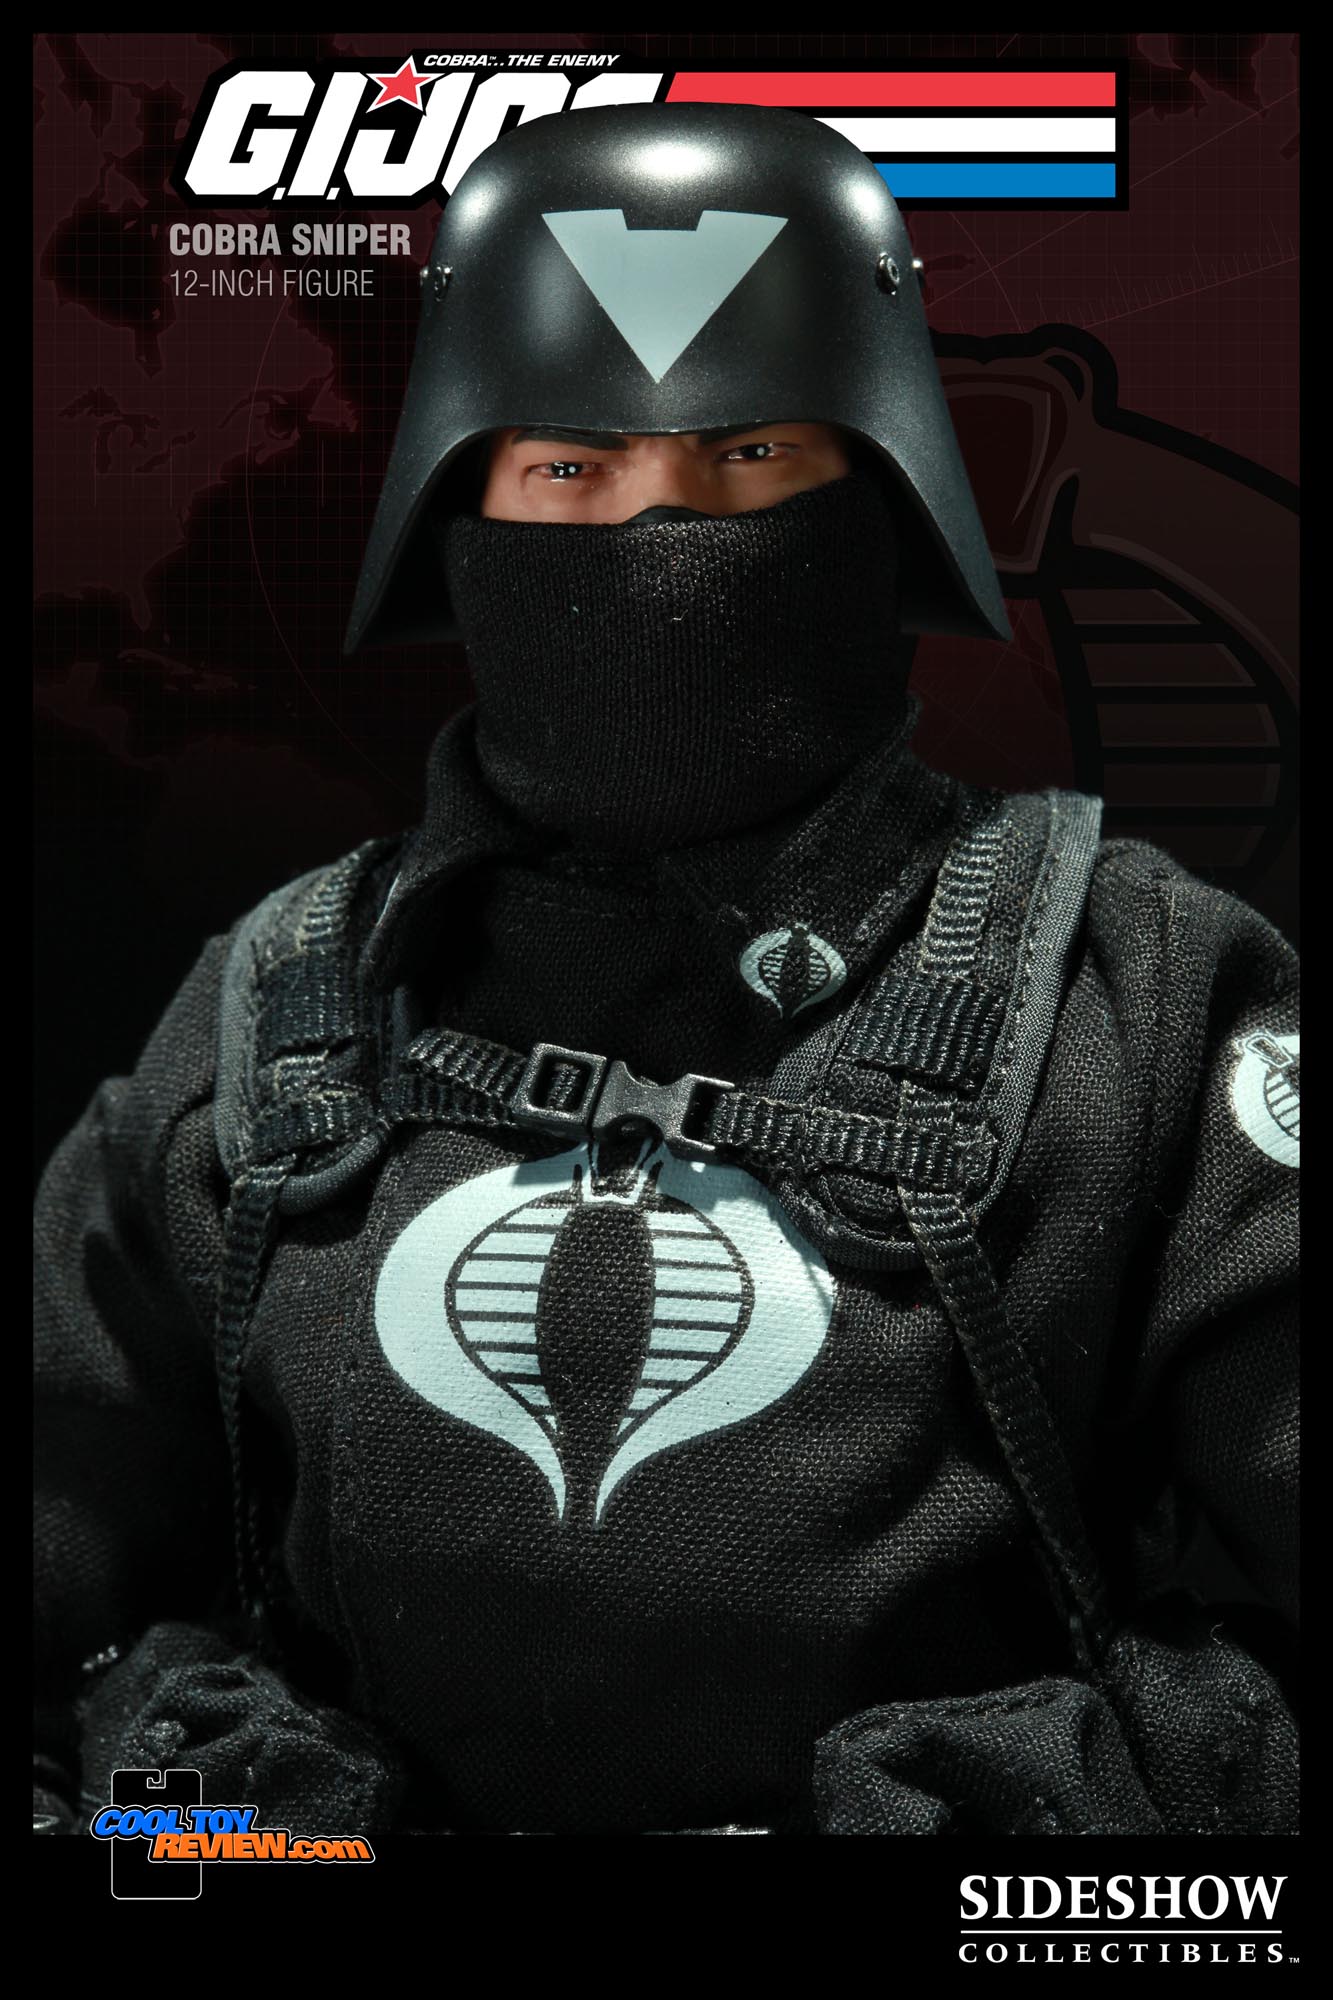 The Cobra Sniper 1/6 scale figure by Sideshow Collectible